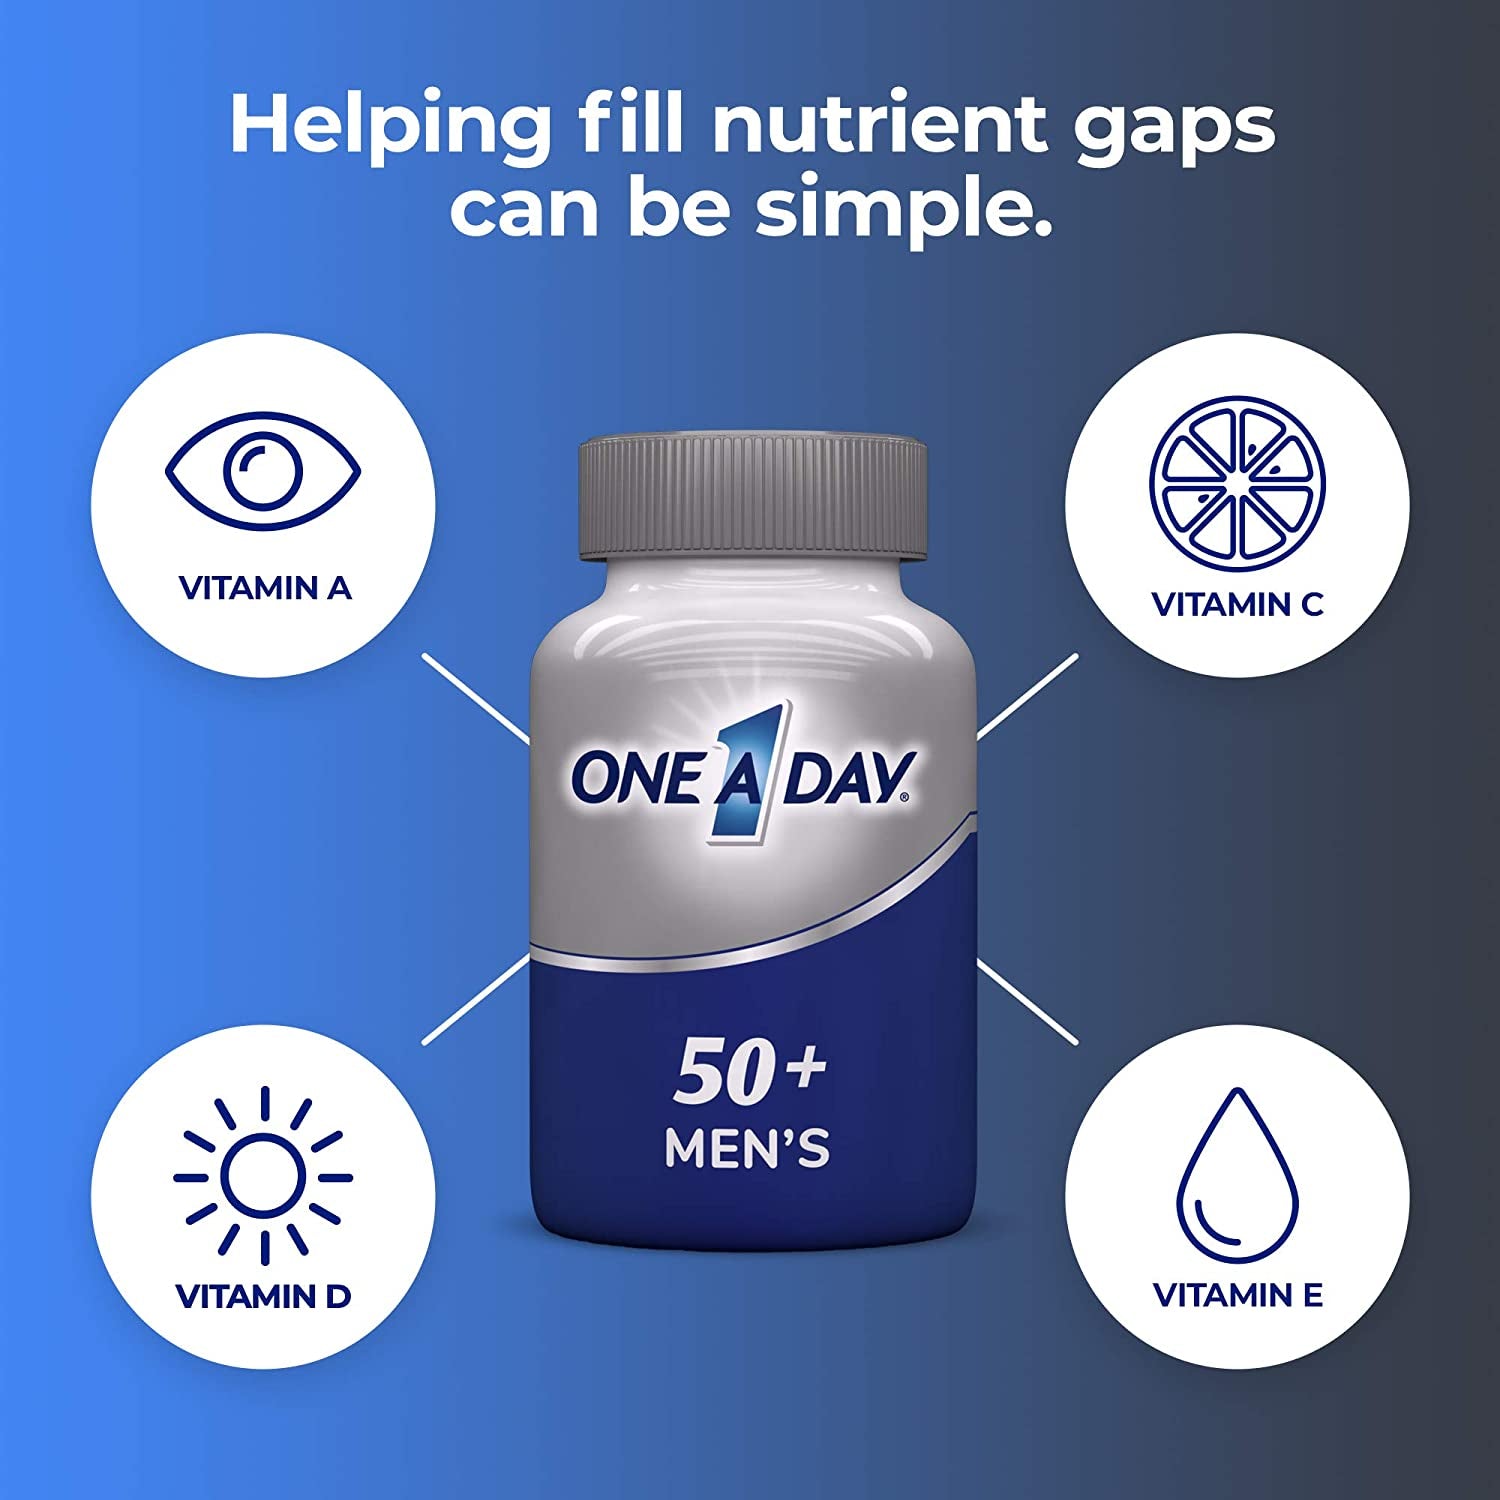 Men’S 50+ Healthy Advantage Multivitamin, Multivitamin for Men with Vitamins A, C, E, B6, B12, Calcium and Vitamin D, Tablet, 200 Count (Pack of 1)